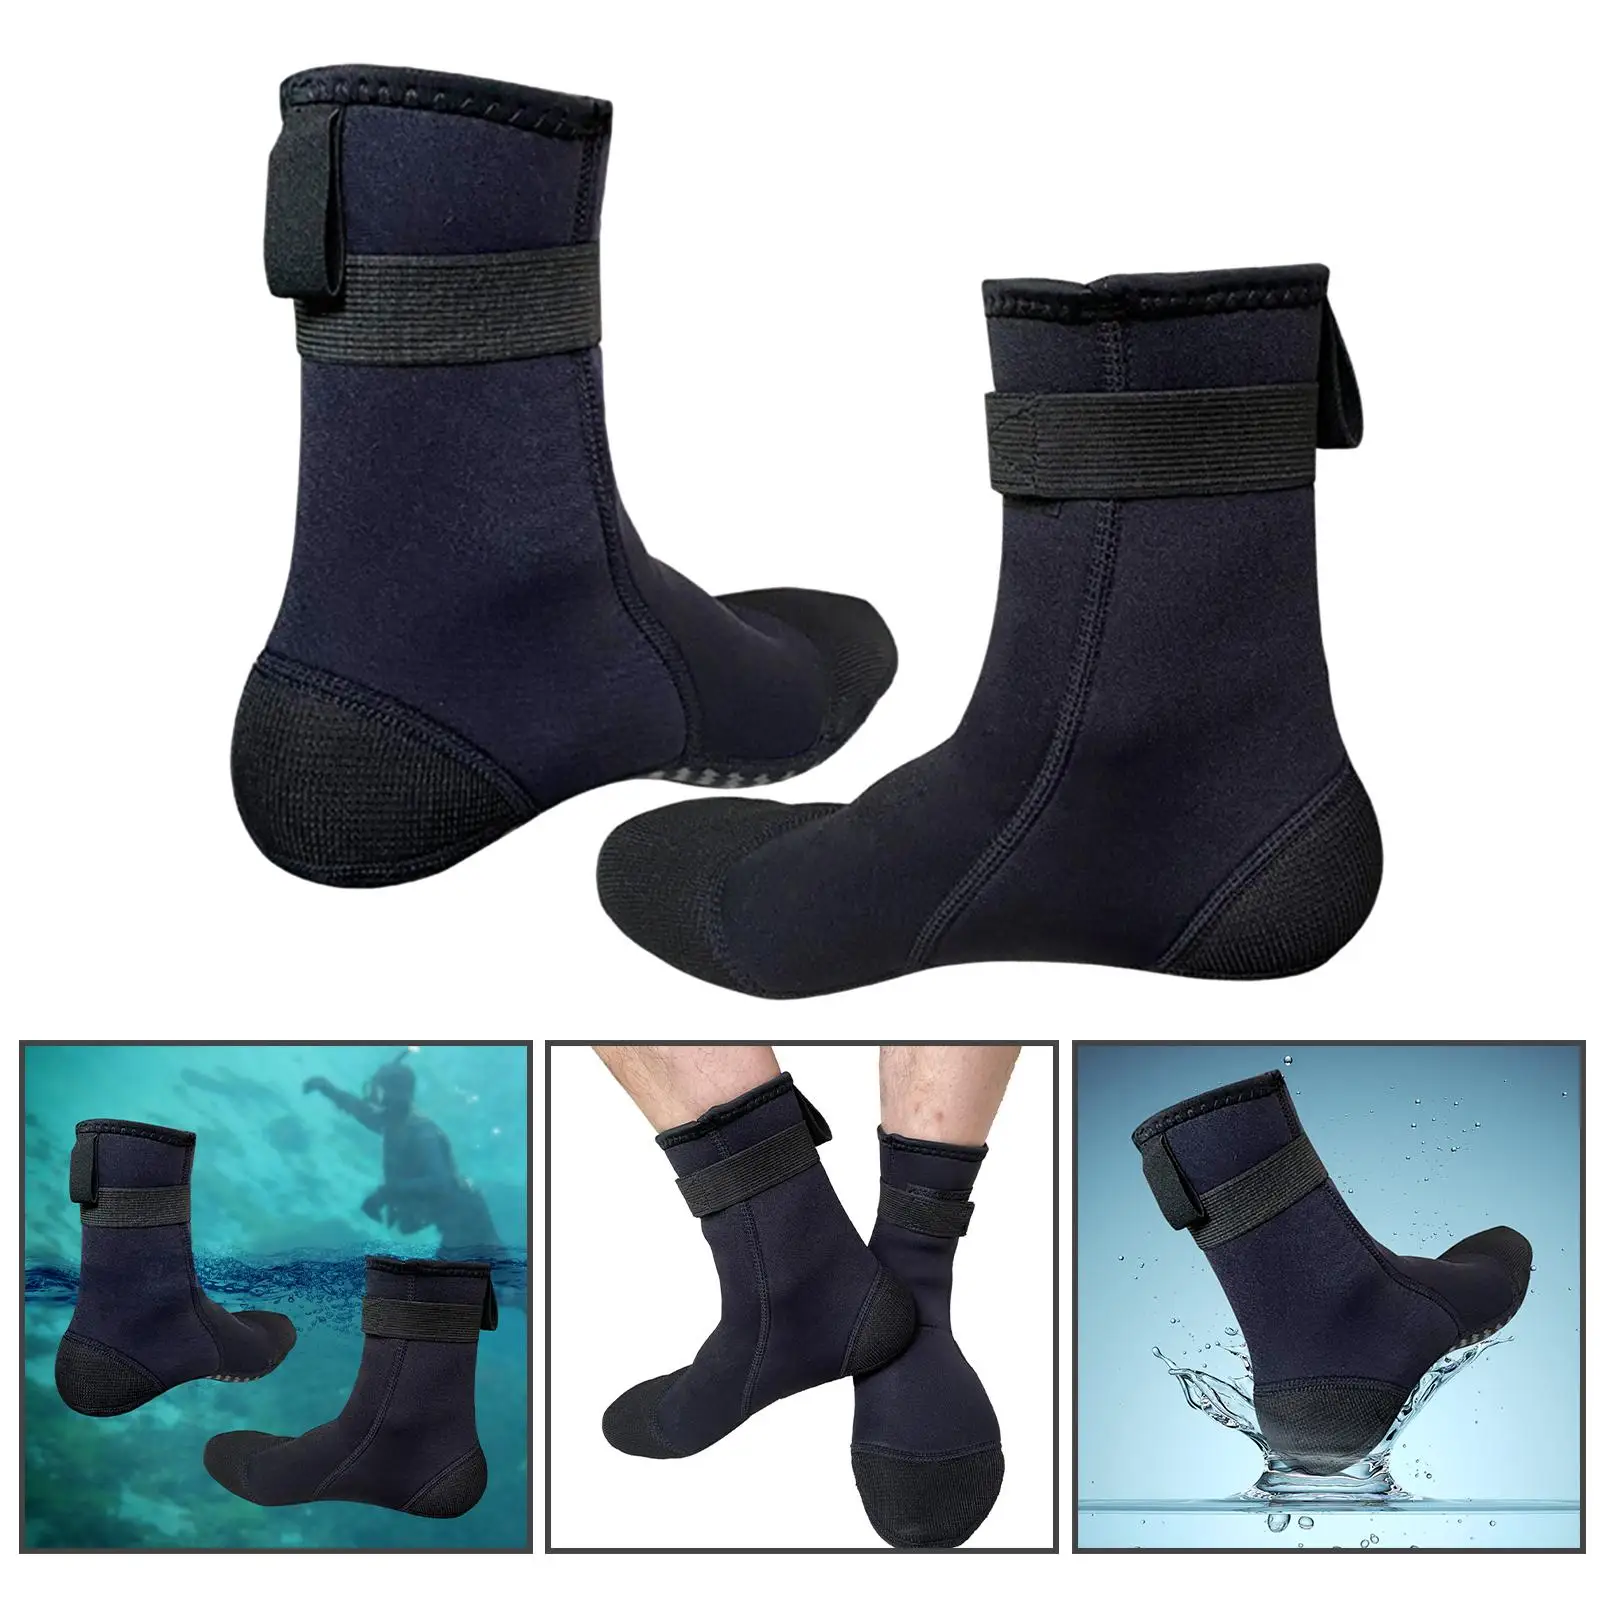 2x Water Socks Waterproof Wetsuit Socks for Beach Volleyball Surfing Paddling Dive